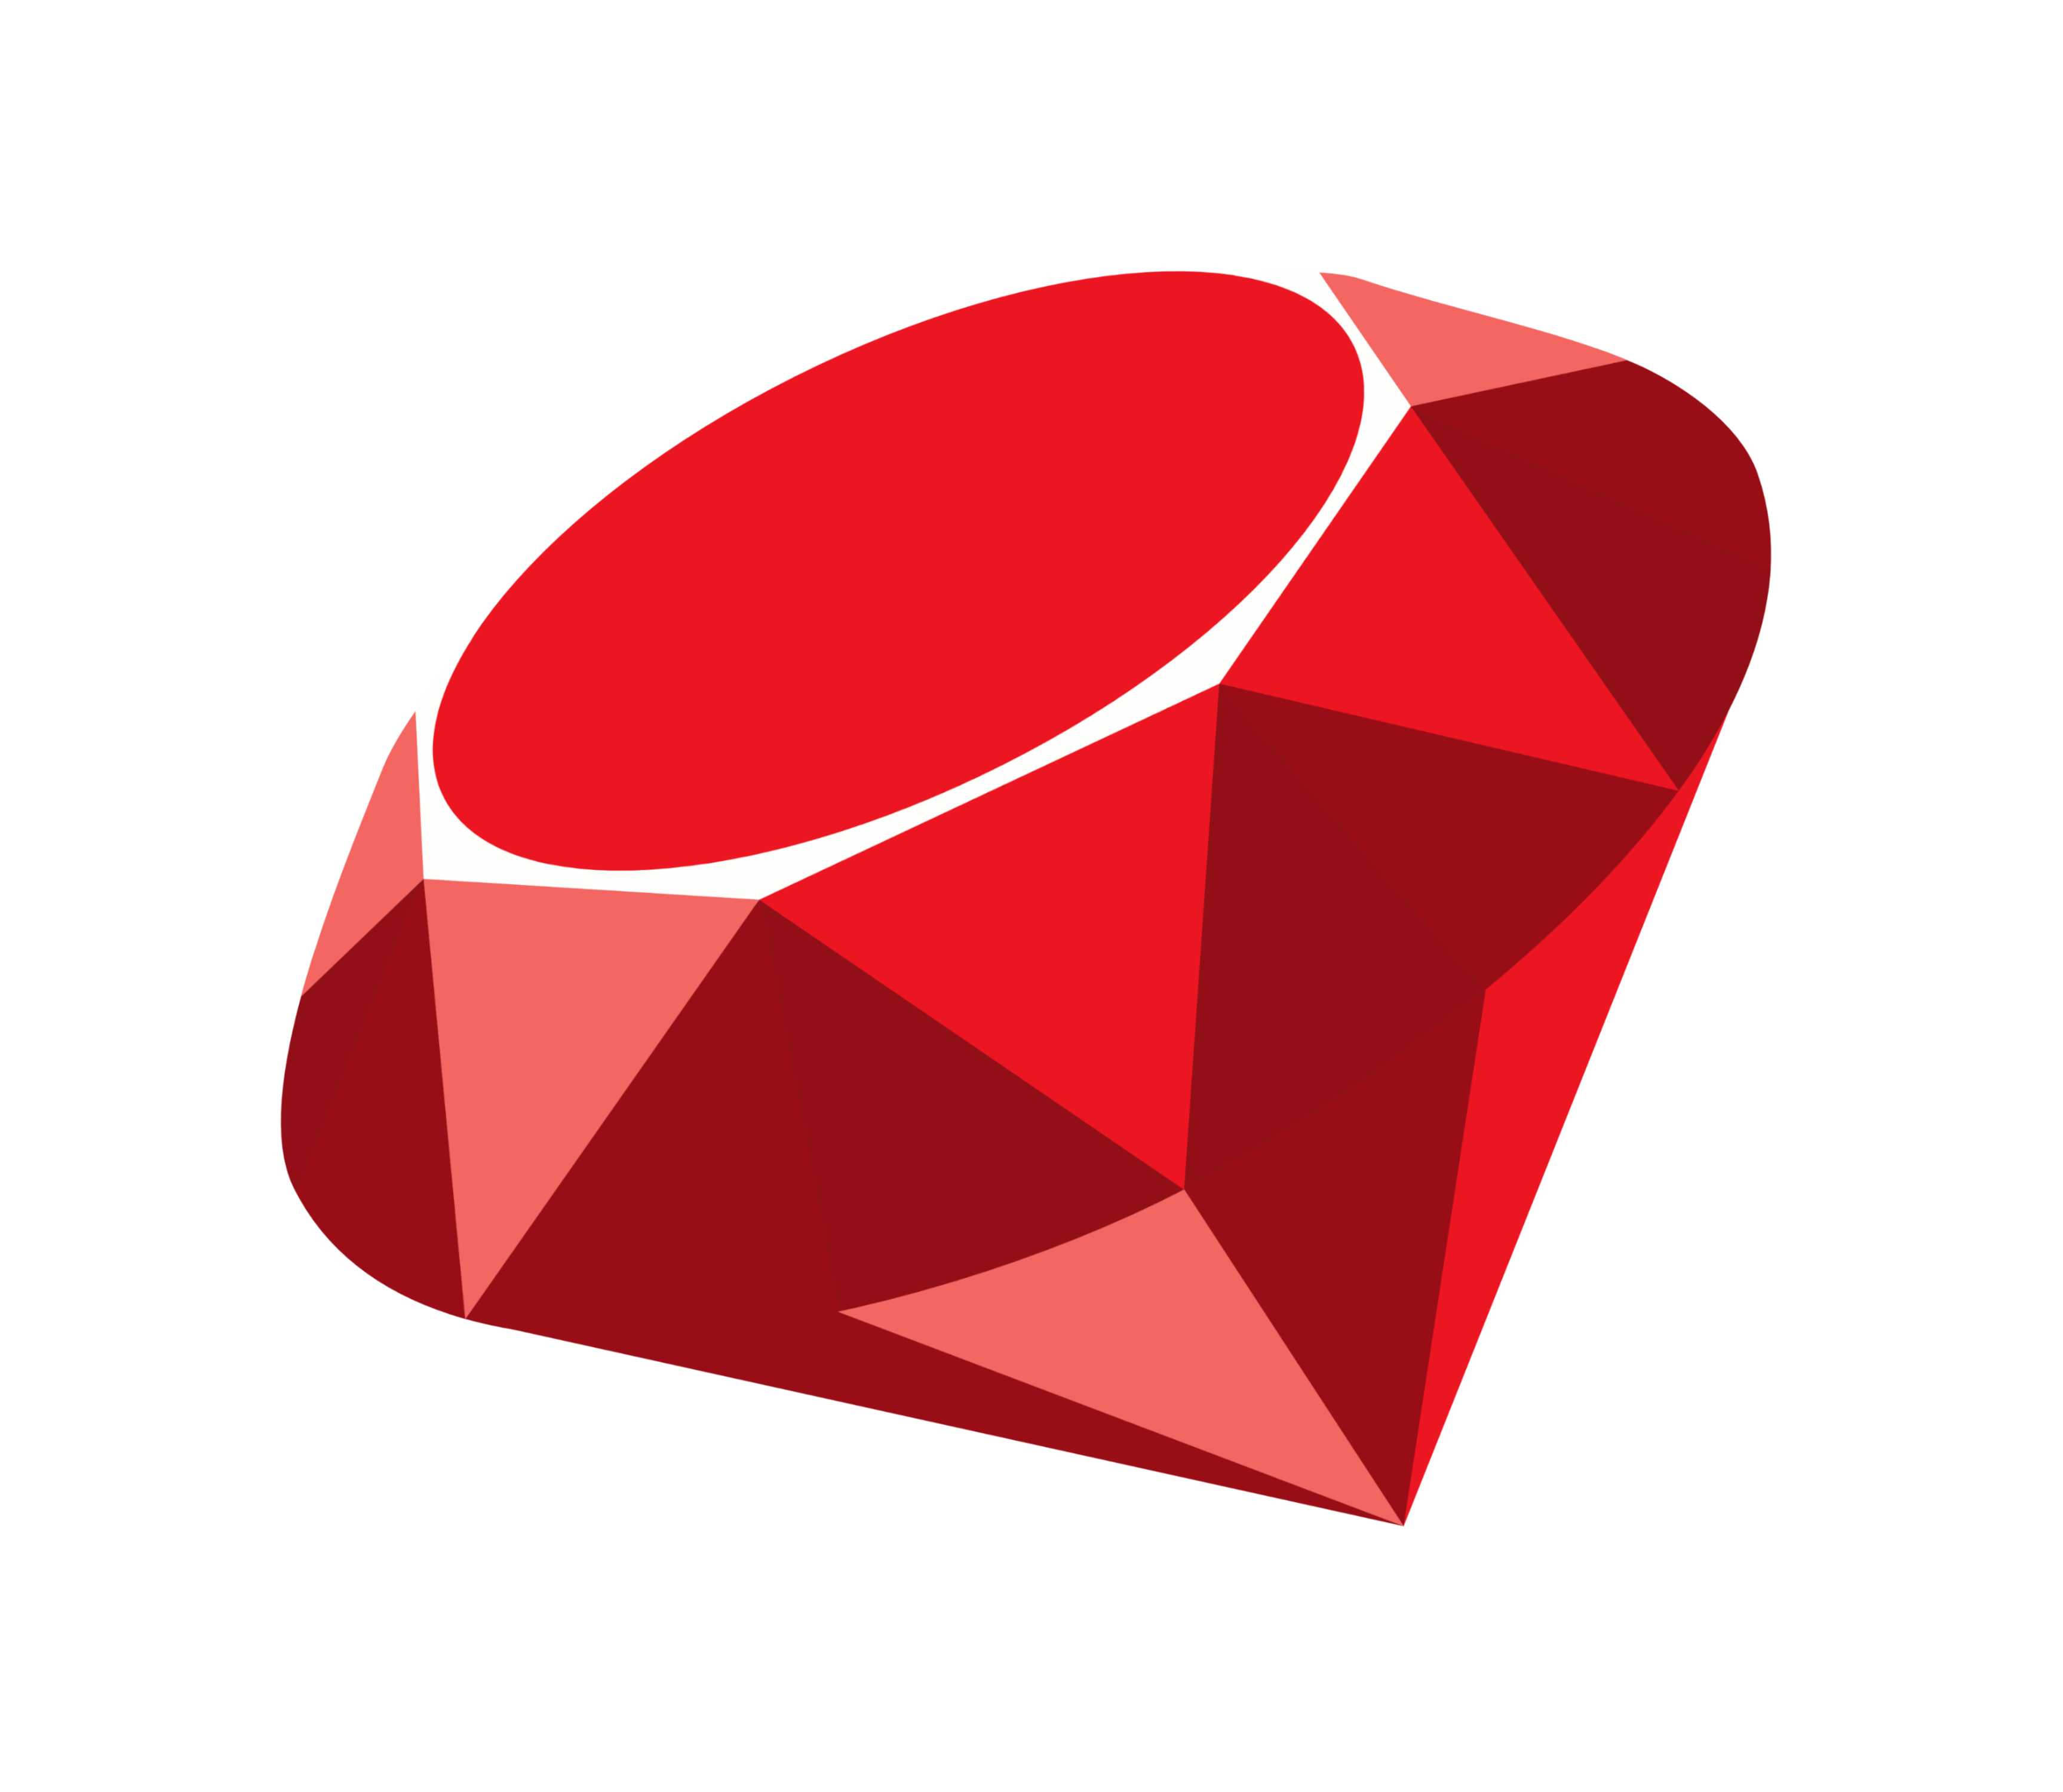 code examples and answer to questions in Ruby programming luaguage